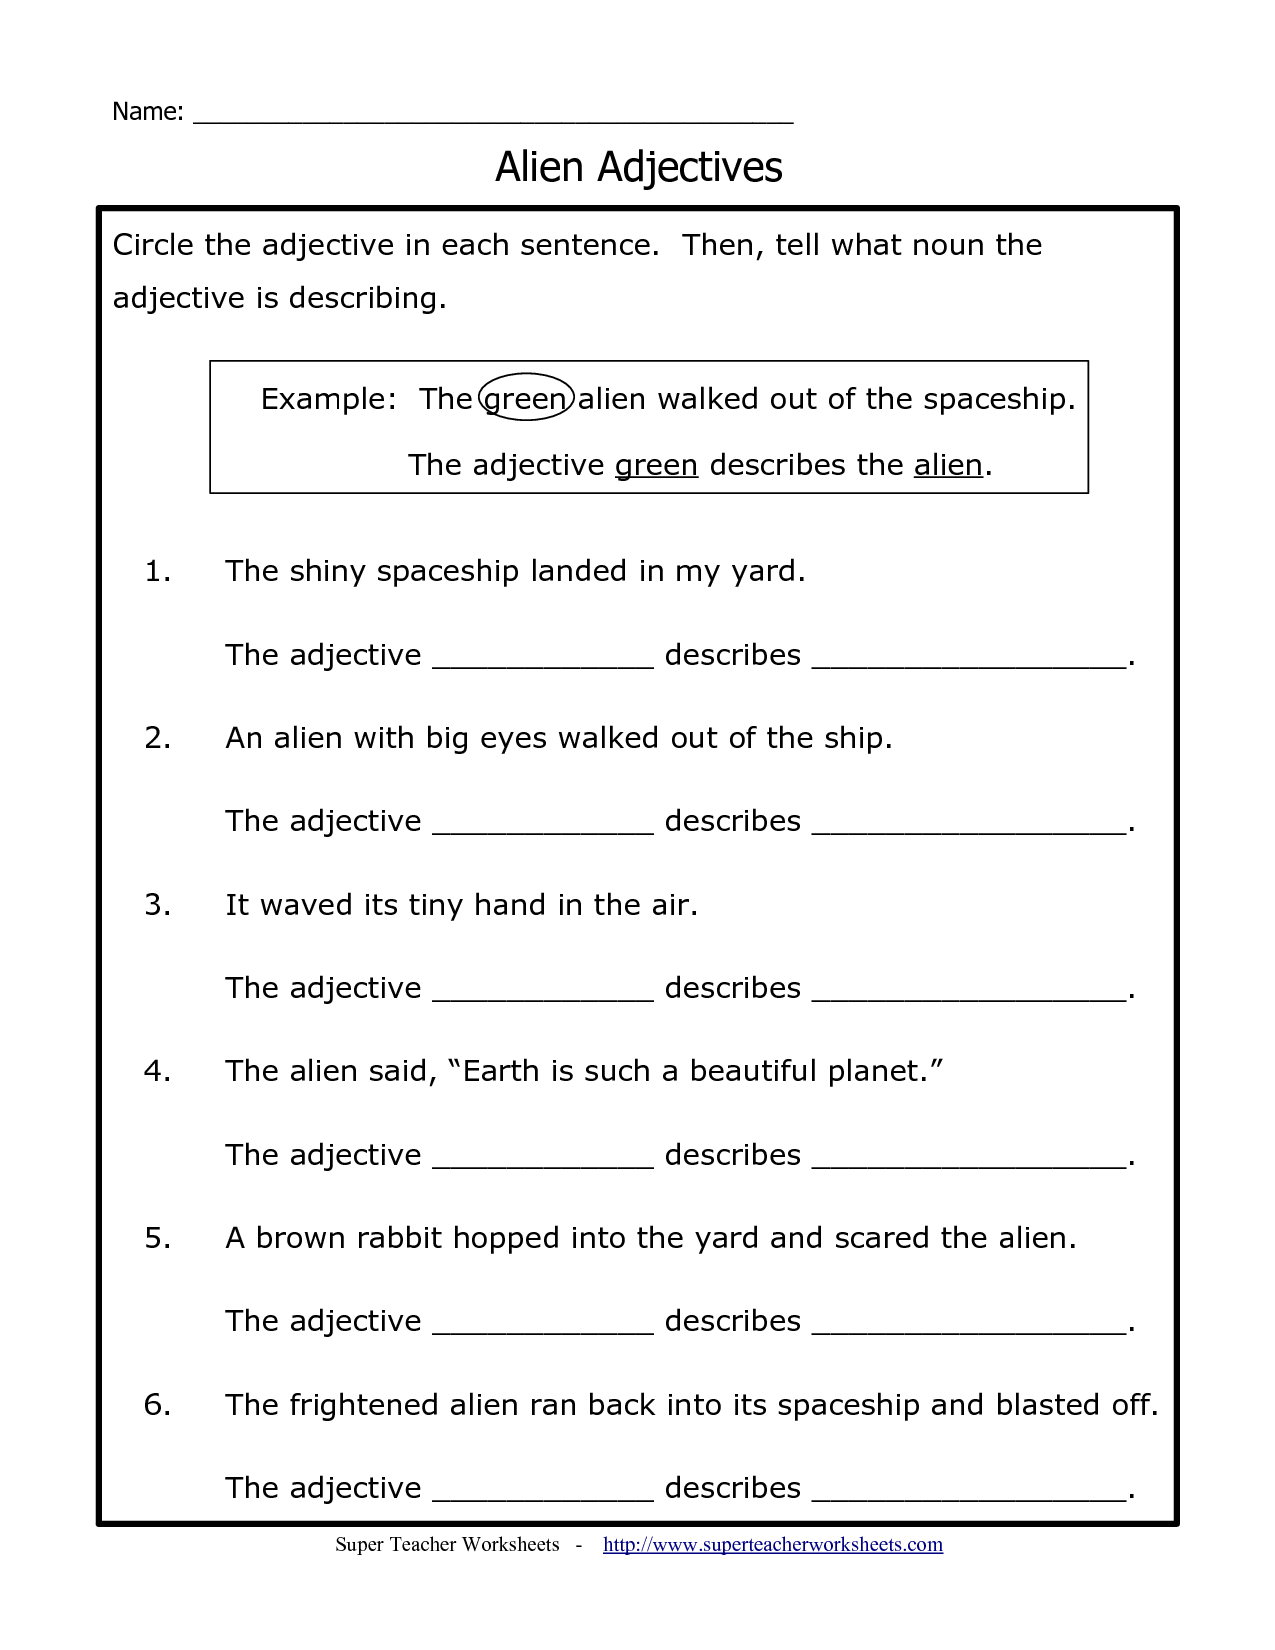 identifying-adverbs-worksheet-with-answers-free-download-goodimg-co